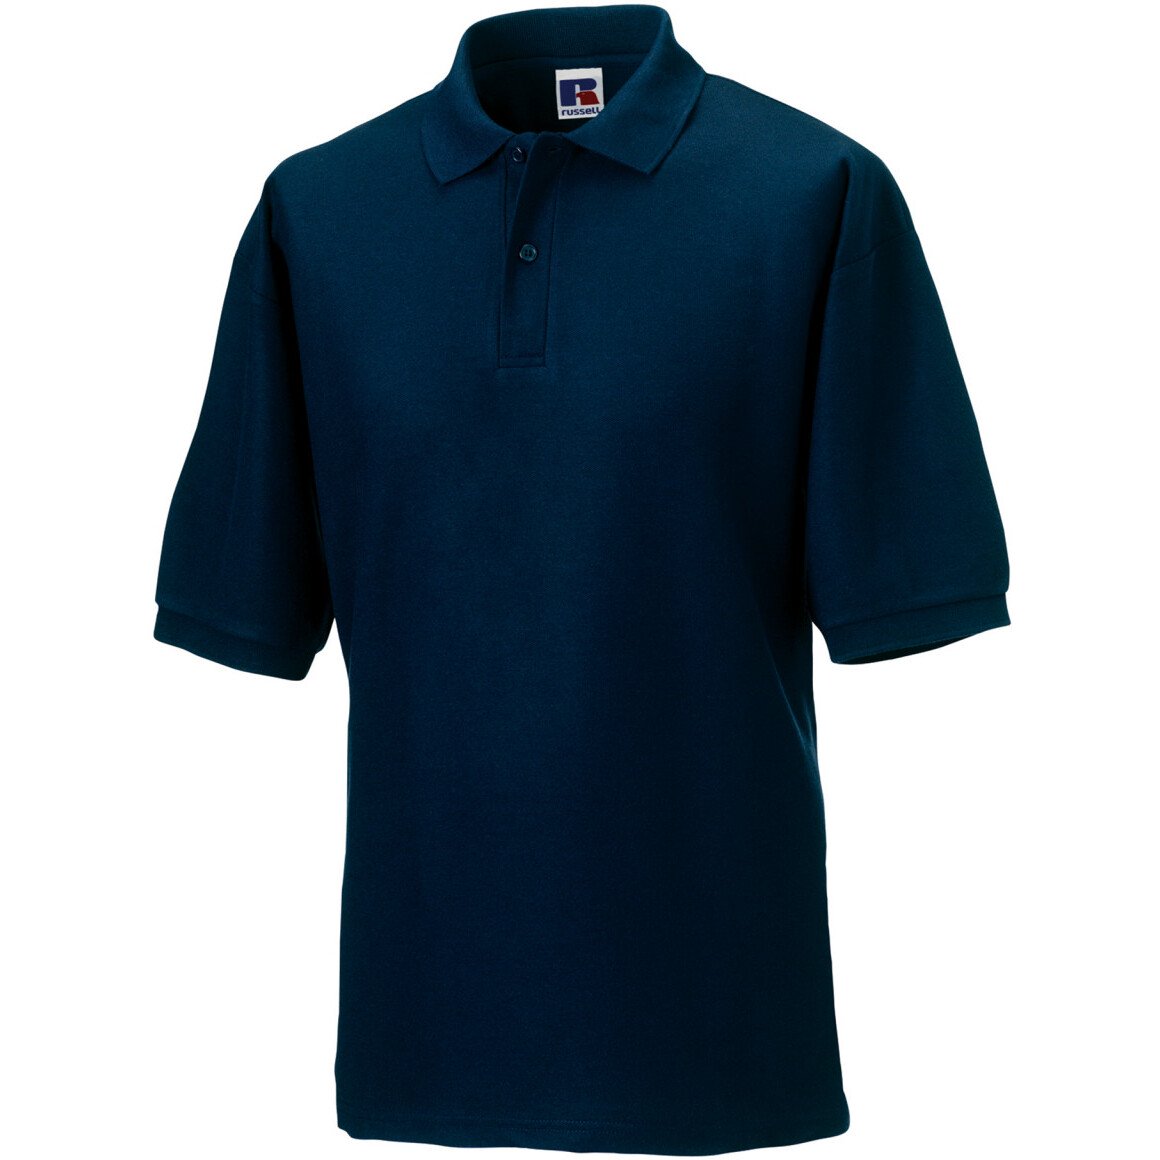 Russell 539M Men's Classic Polycotton Polo Shirt. Sizes XS-2XL from ...